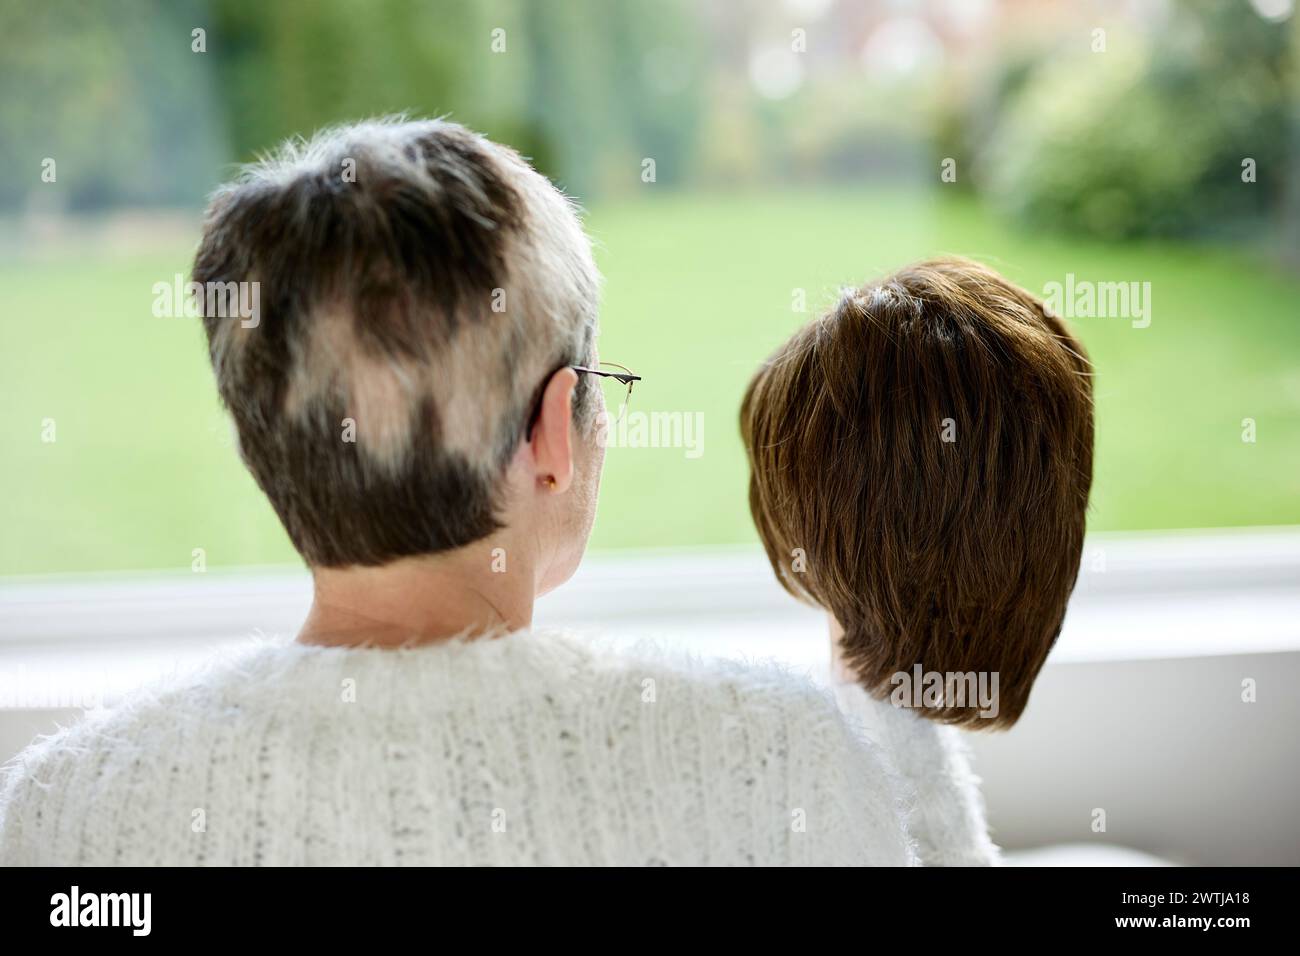 Woman with Alopecia holding a wig Stock Photo